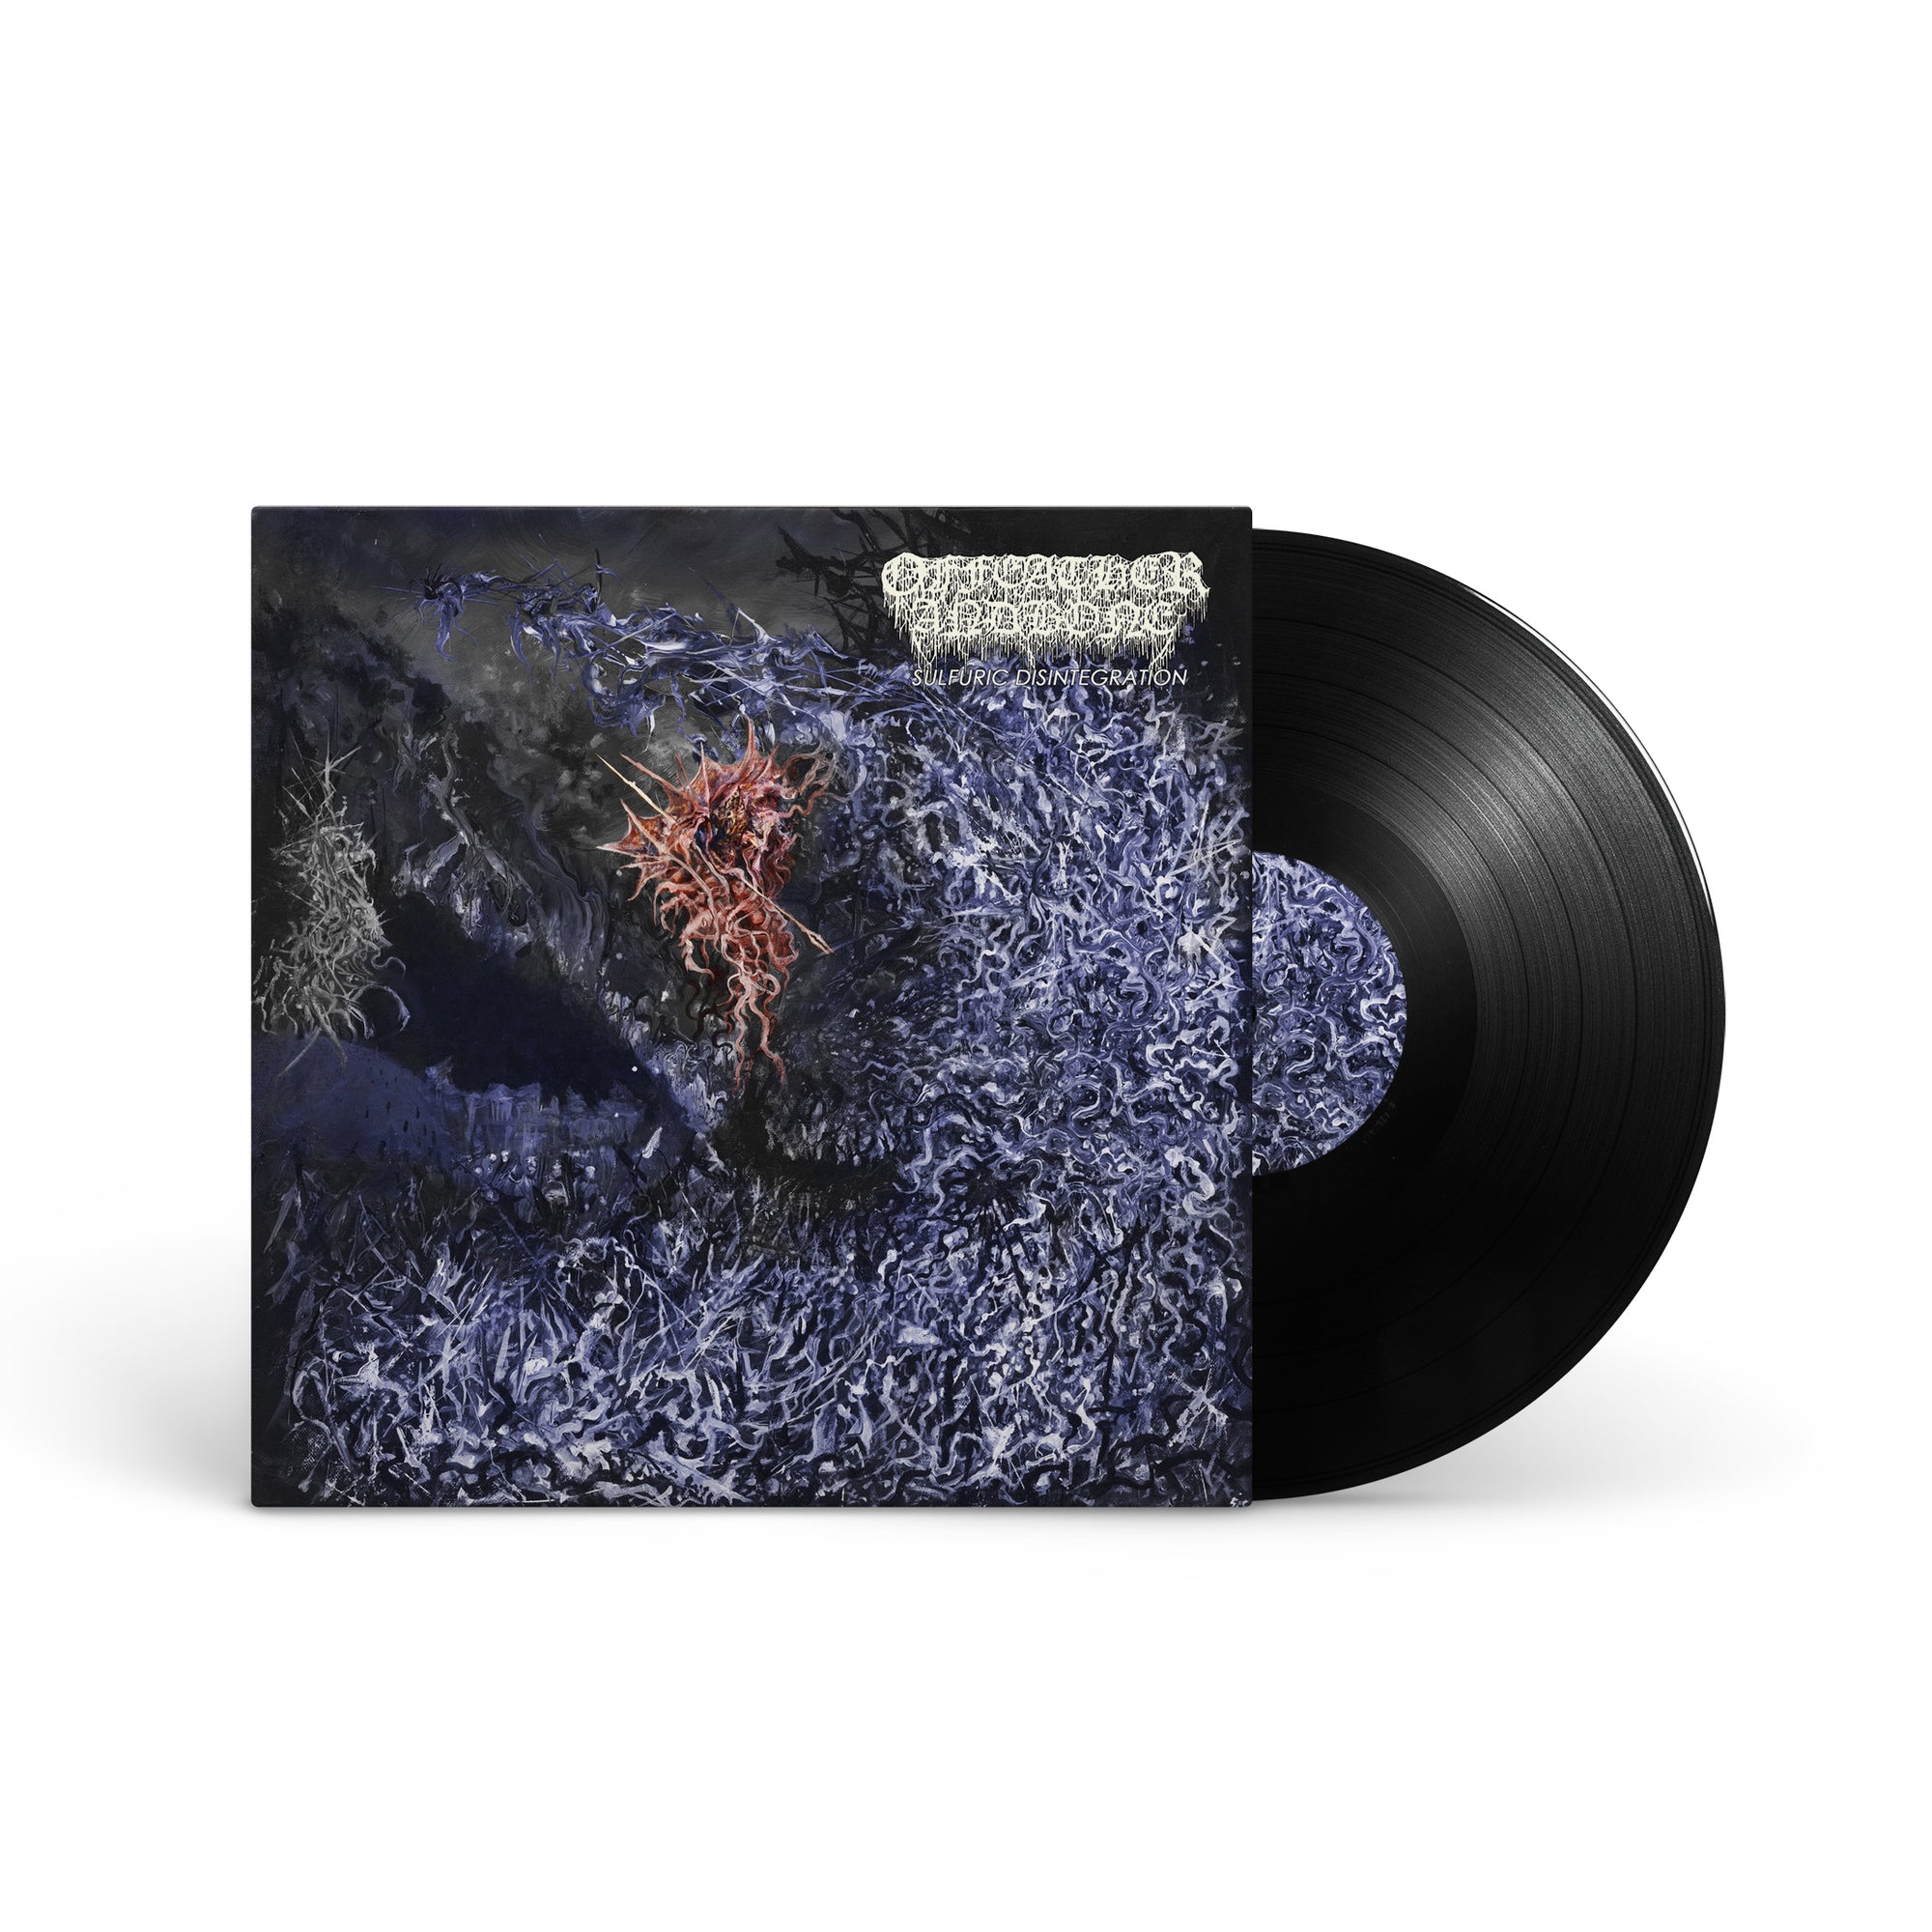 OF FEATHER AND BONE "Sulfuric Disintegration" LP